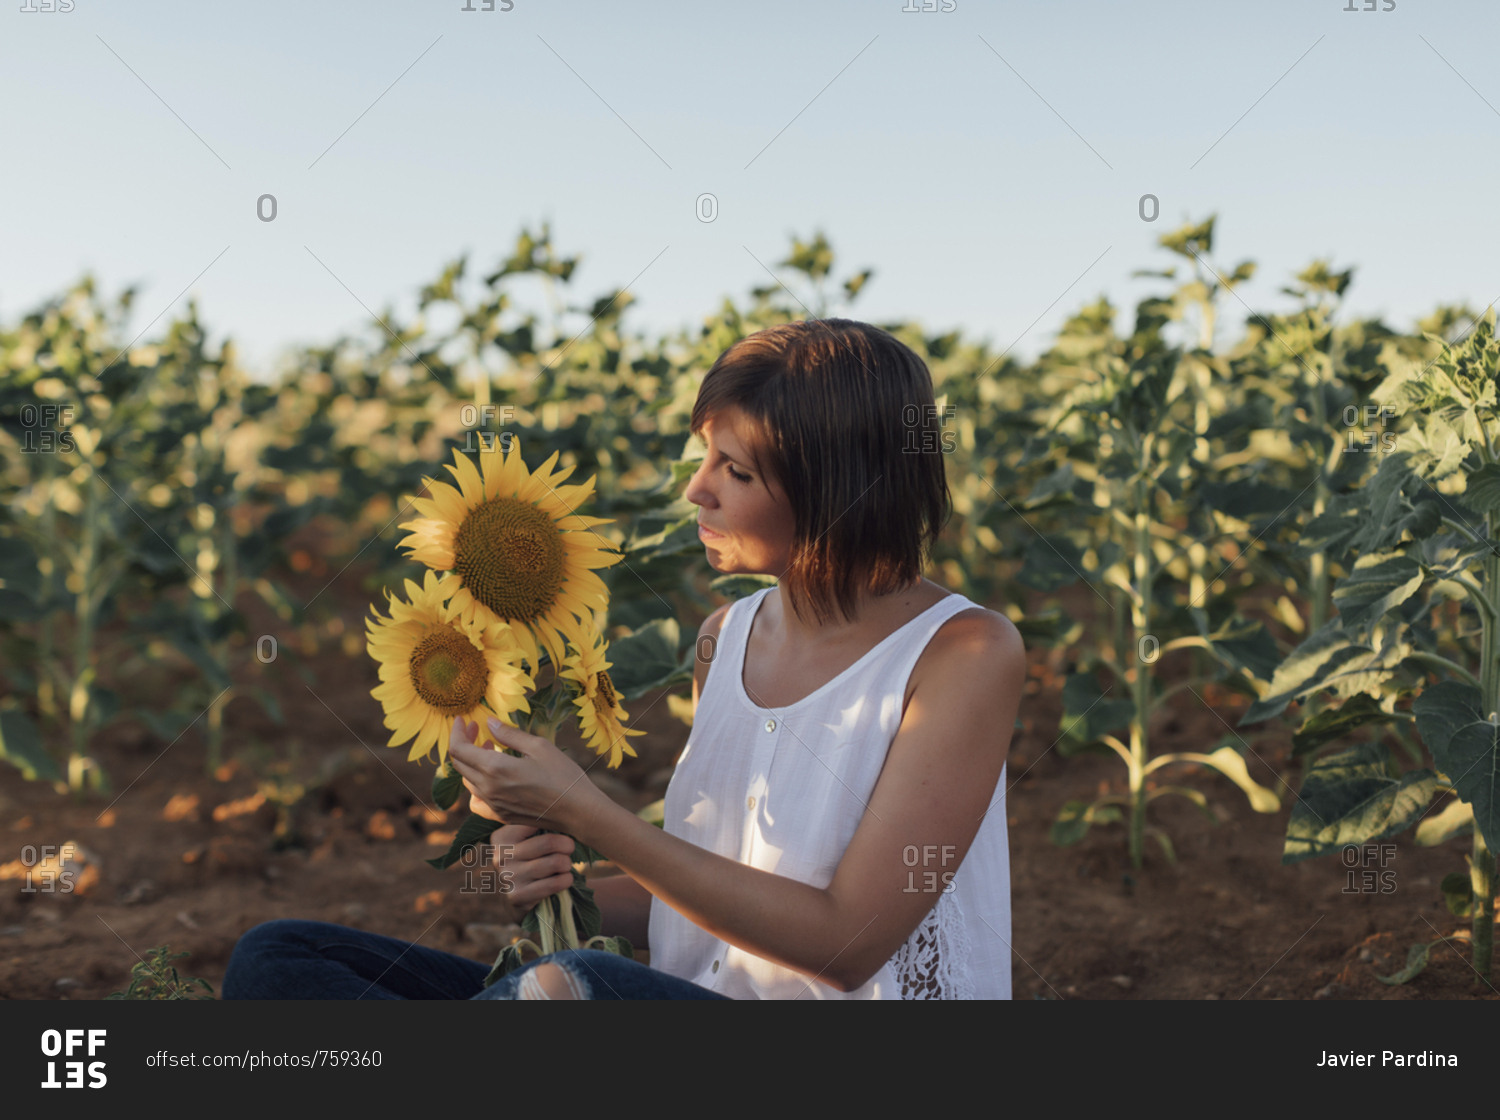 Woman holding sunflowers while sitting in a sunflower field